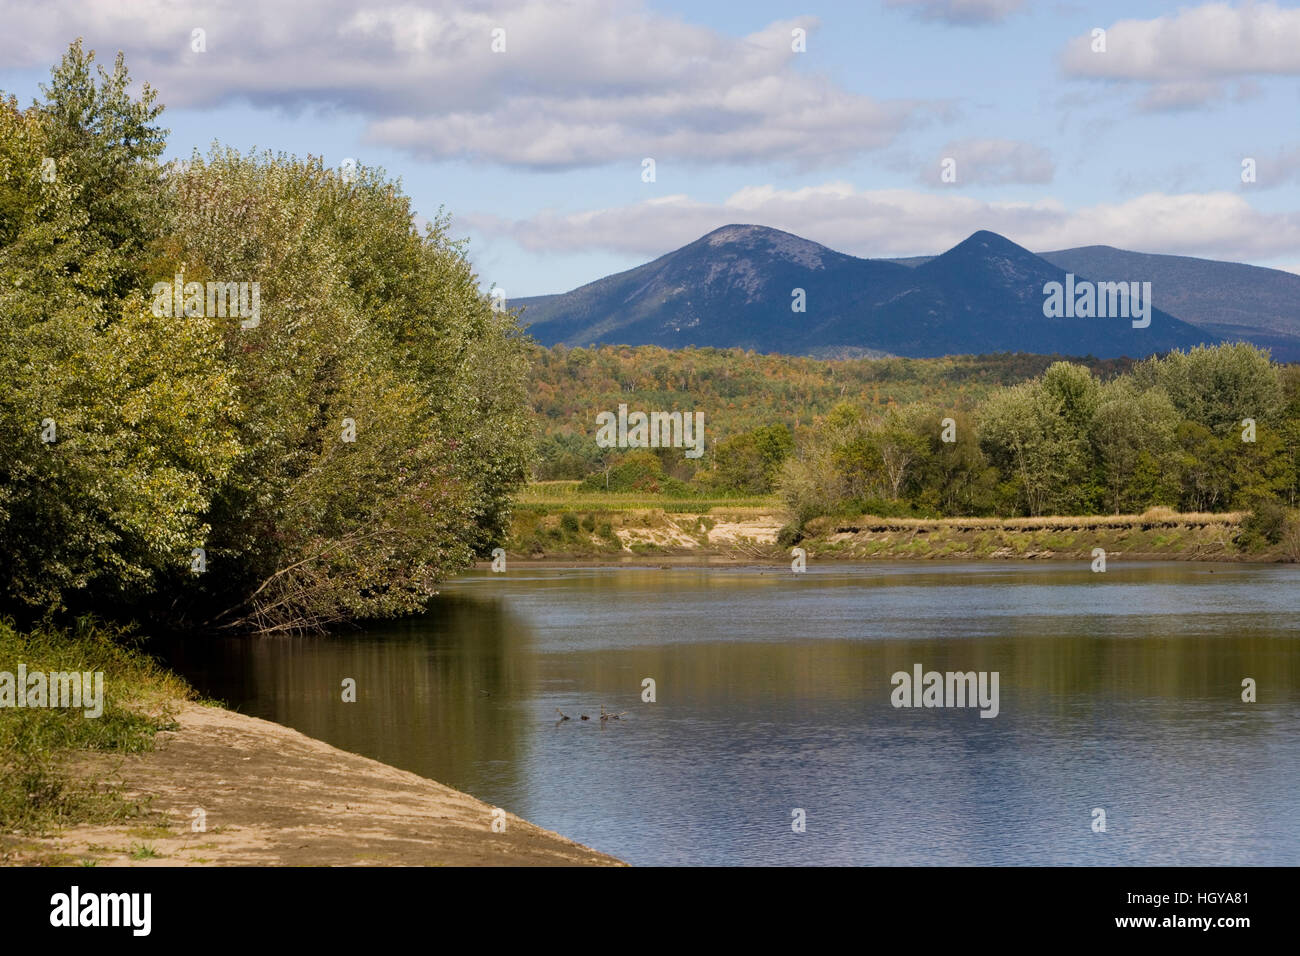 The Percy Peaks as seen from the Connecticut River in Maidstone, Vermont. Stock Photo